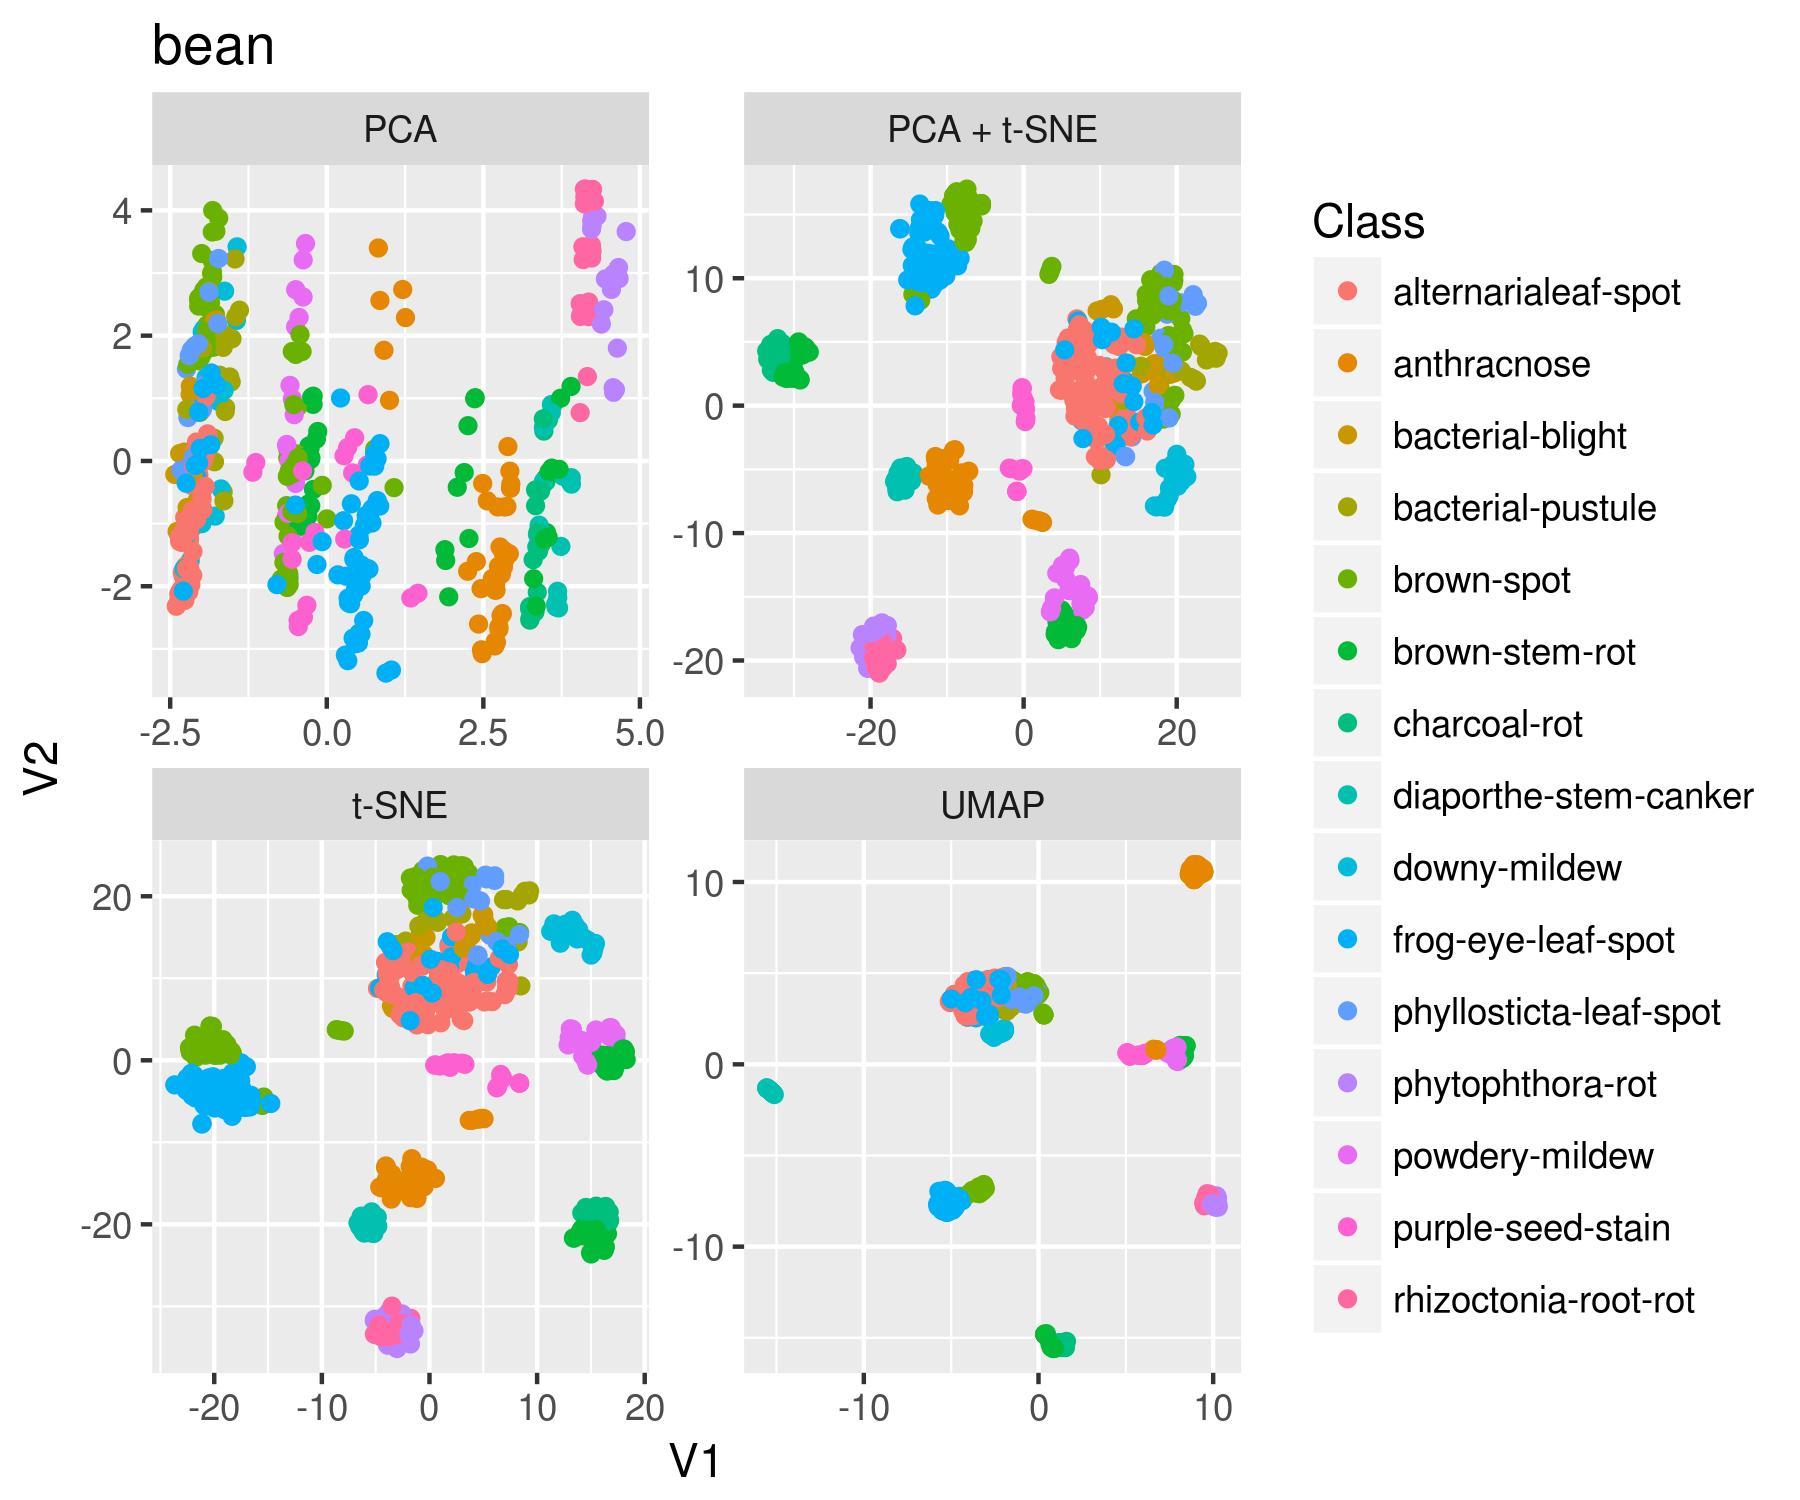 t-SNE, PCA, and UMAP on soybeans